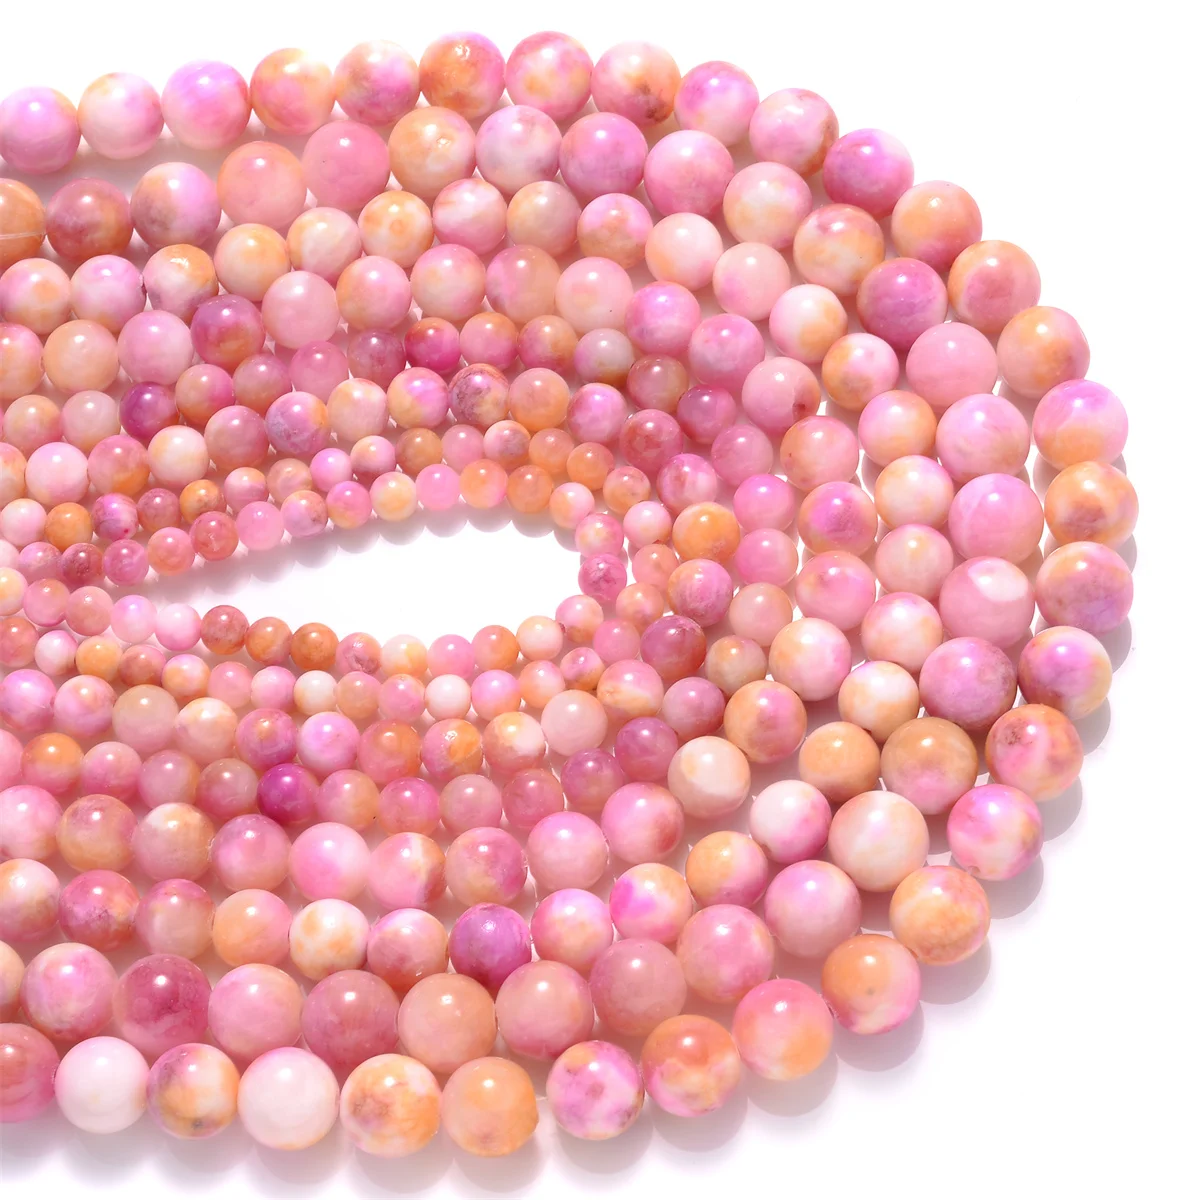 Natural Stone Persian Jades Beads Round Smooth Pink Yellow Jaspers Loose  Spacer Bead For Jewelry Making